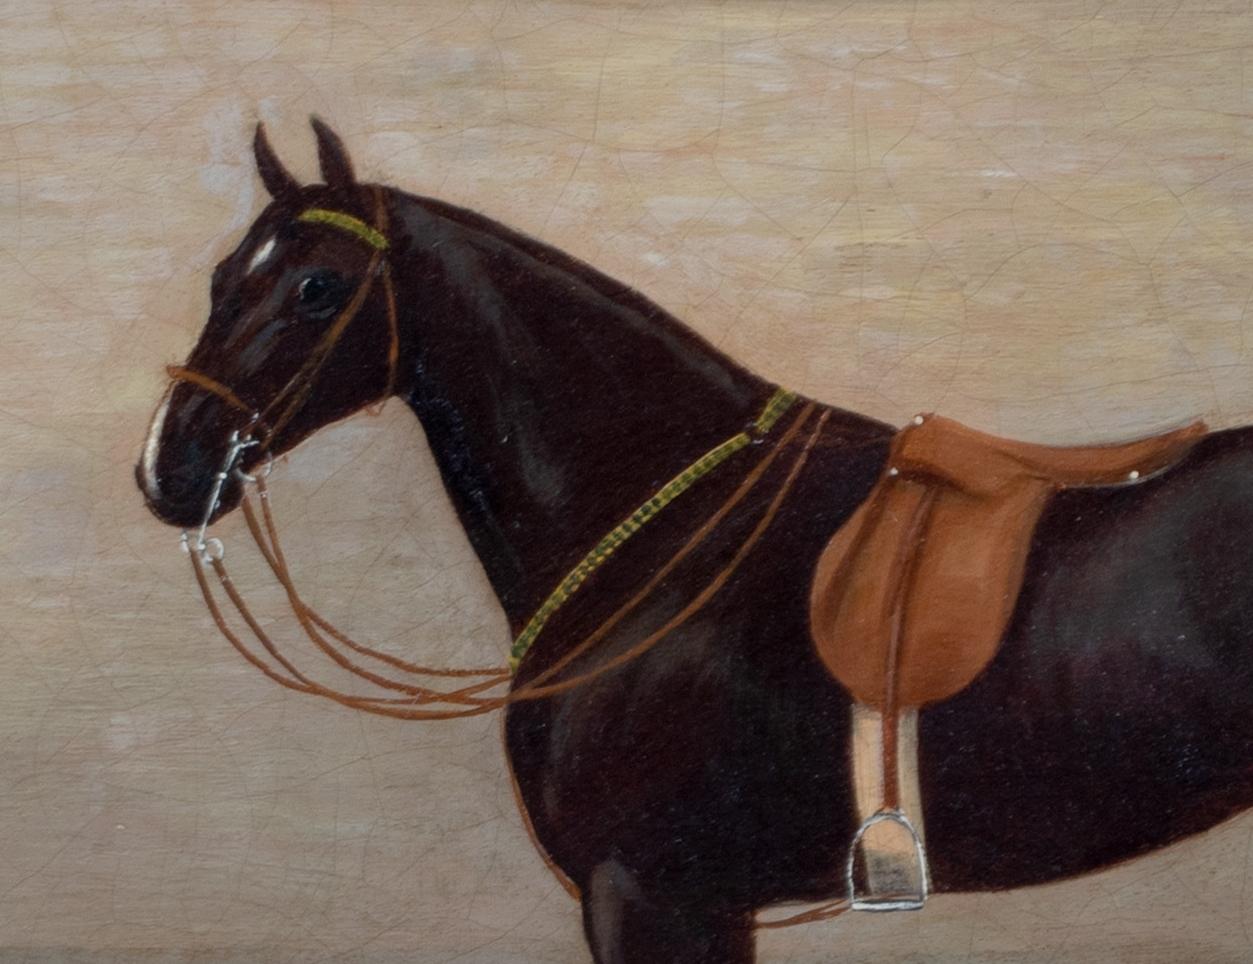 Portrait Of A Horse, 19th Century

Henry Bernard CHALON (1771-1849) to $250,000

Large 19th Century portrait of a horse, oil on canvas by Henry Bernard Chalon. Excellent quality and condition side profile study of the horse in a courtyard. Inscribed